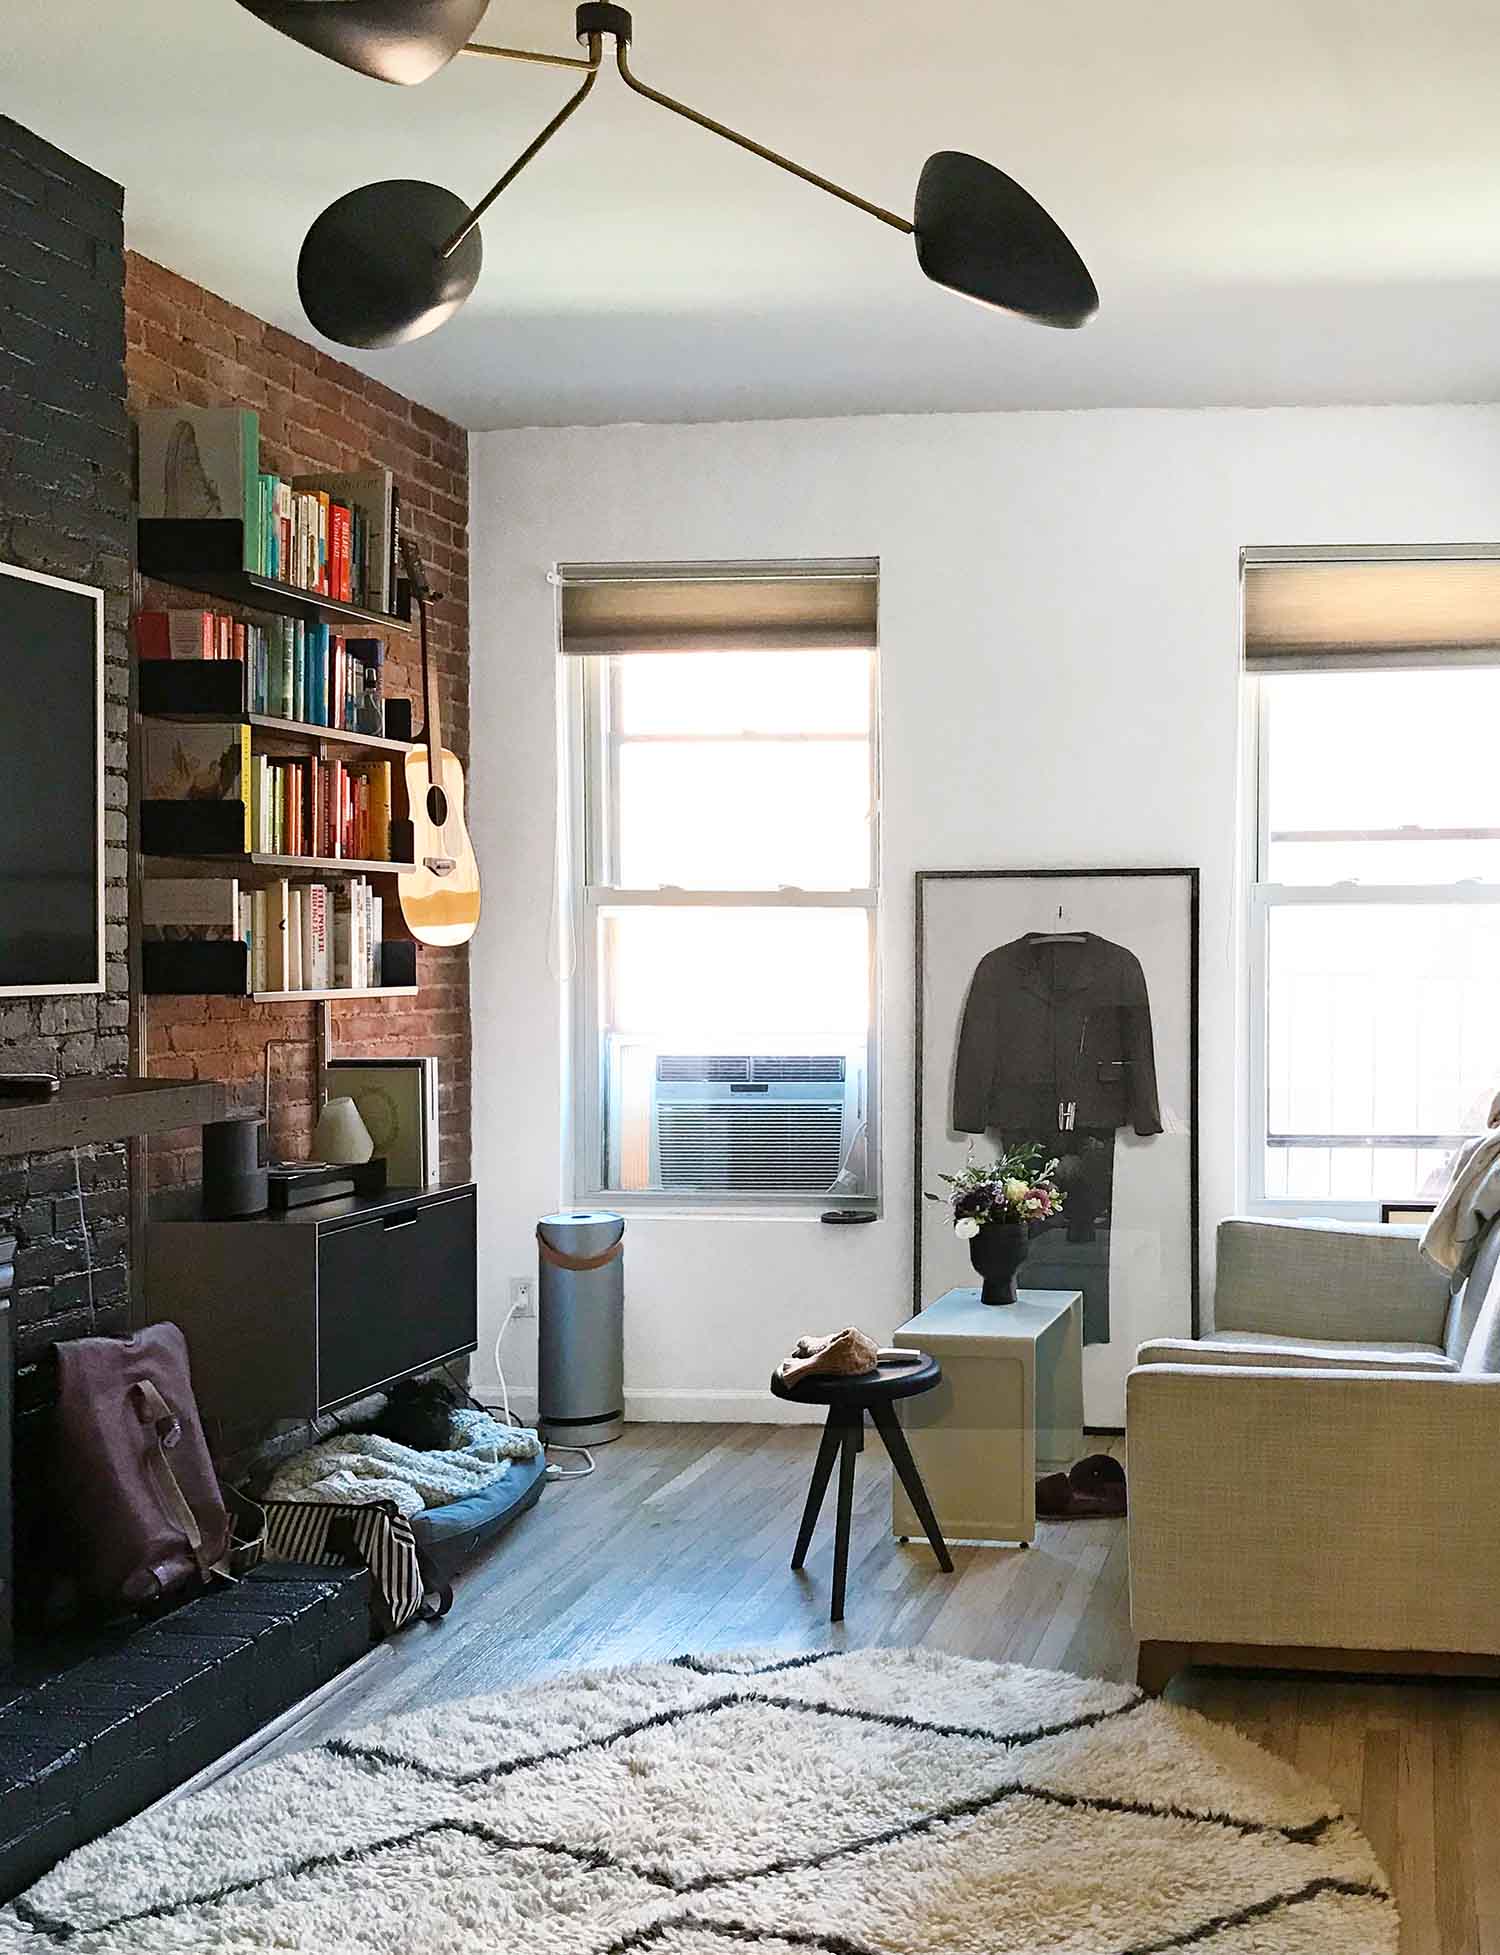 If you're painting a small space, check out these 5 tips for painting a small, city apartment from an NYC Style Editor!